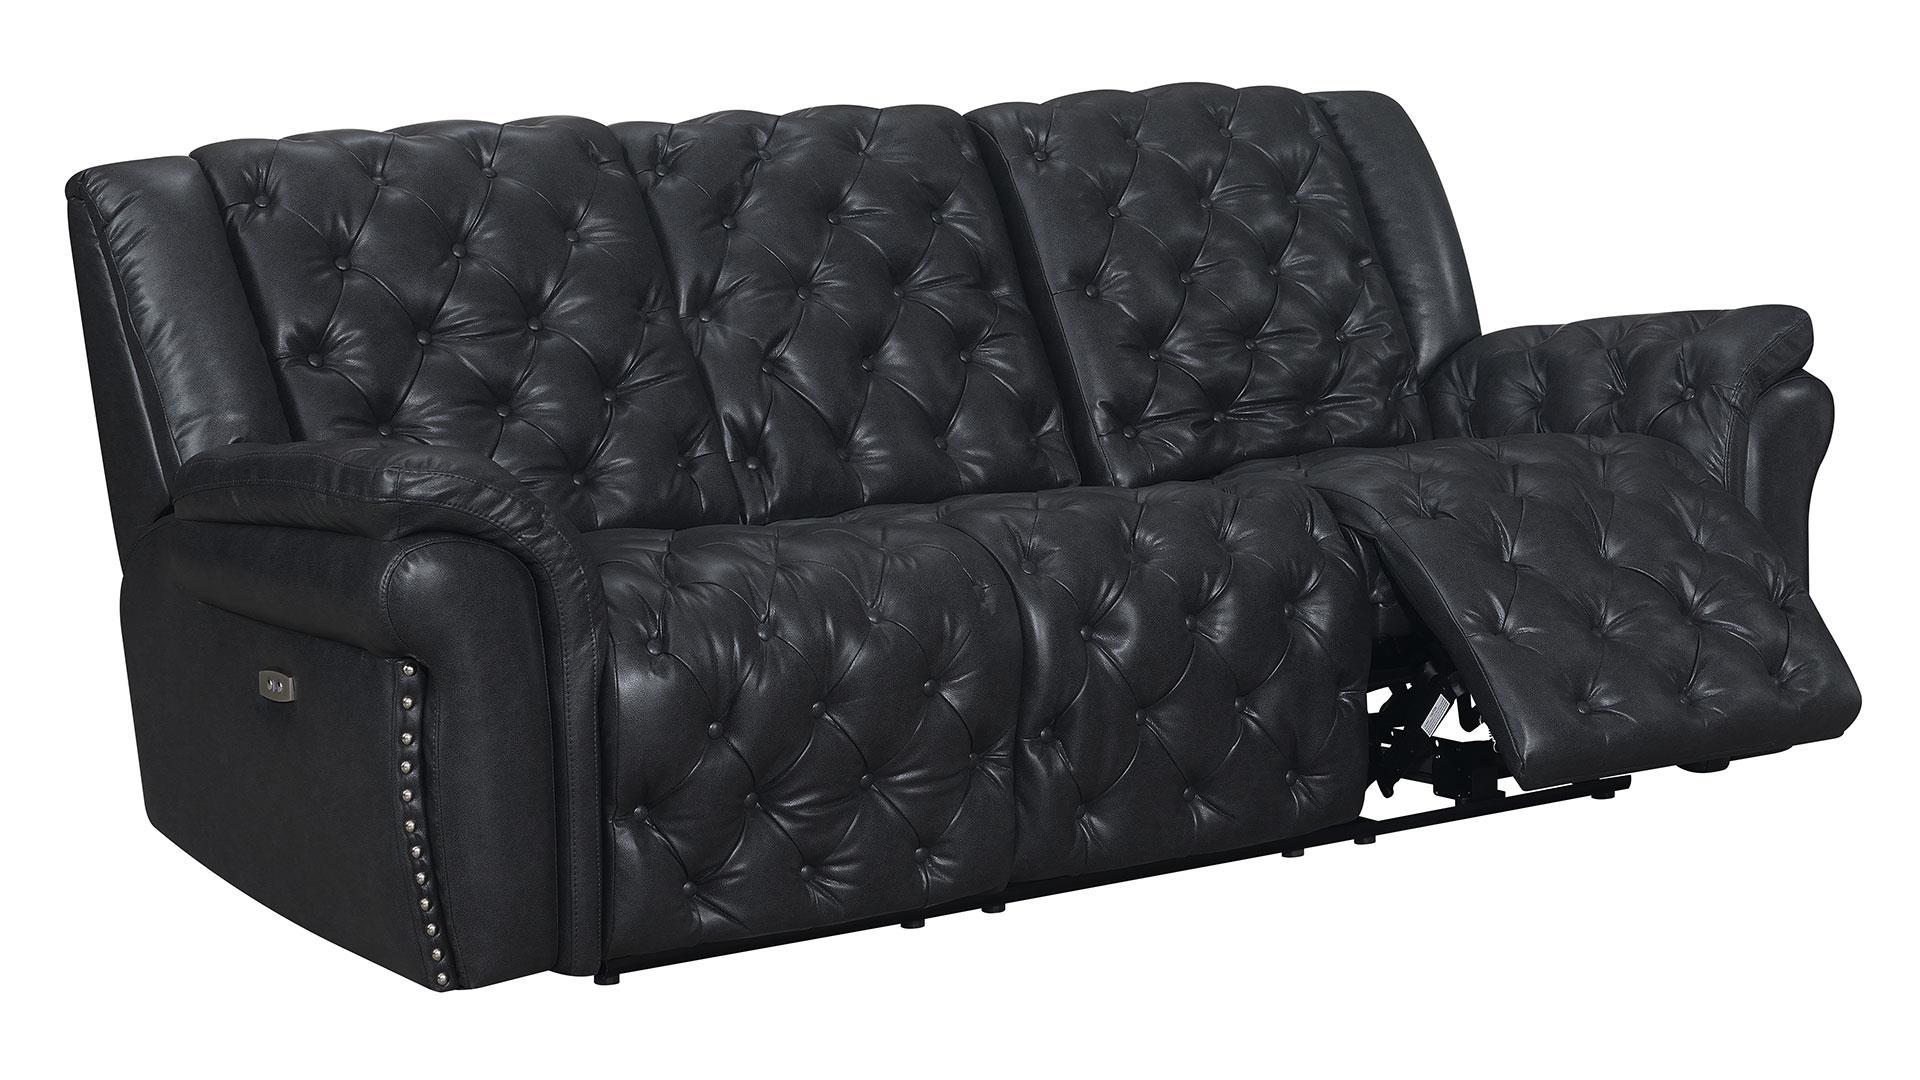 Transitional Power Reclining Sofa EVELYN BLANCHE CHARCOAL EVELYN-DTP932-7-PRS in Charcoal Leather Air/Match